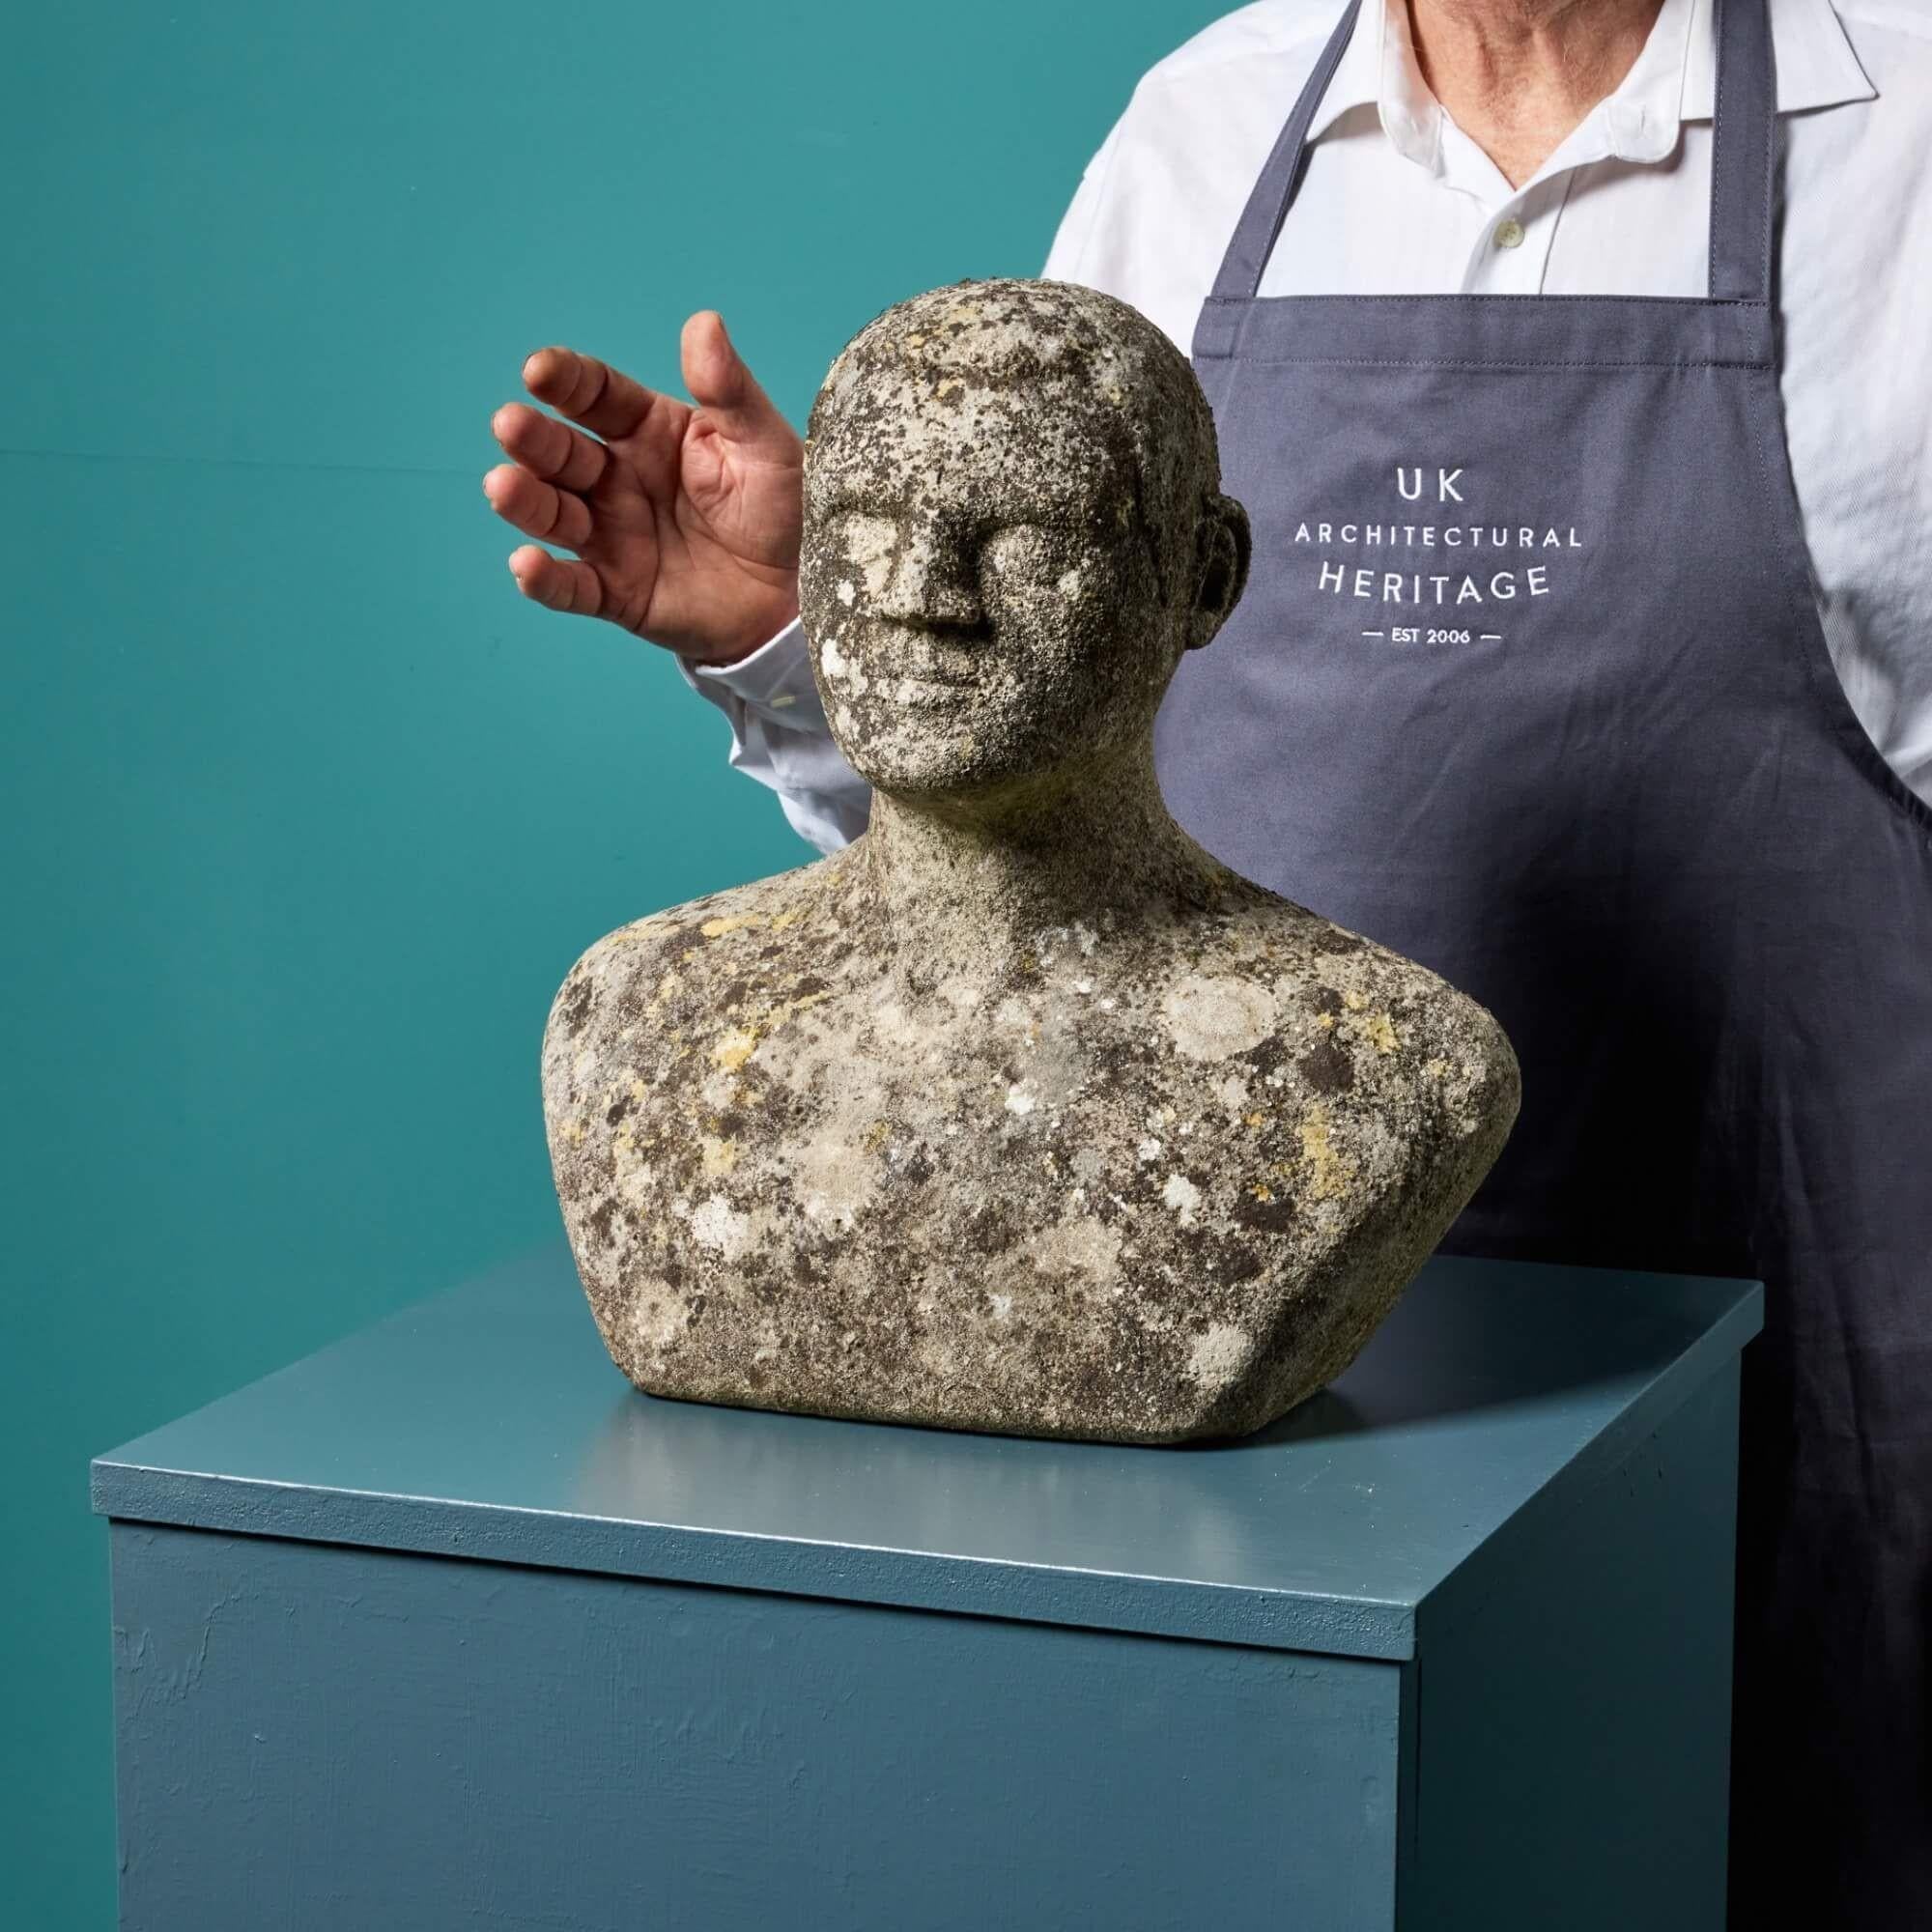 This carved stone head bust sculpture was reputedly carved by a student of 20th century British architect and artist, Sir Hugh Casson. It depicts the shoulders and head of a man in stone with a neutral expression and weathered surface finish that